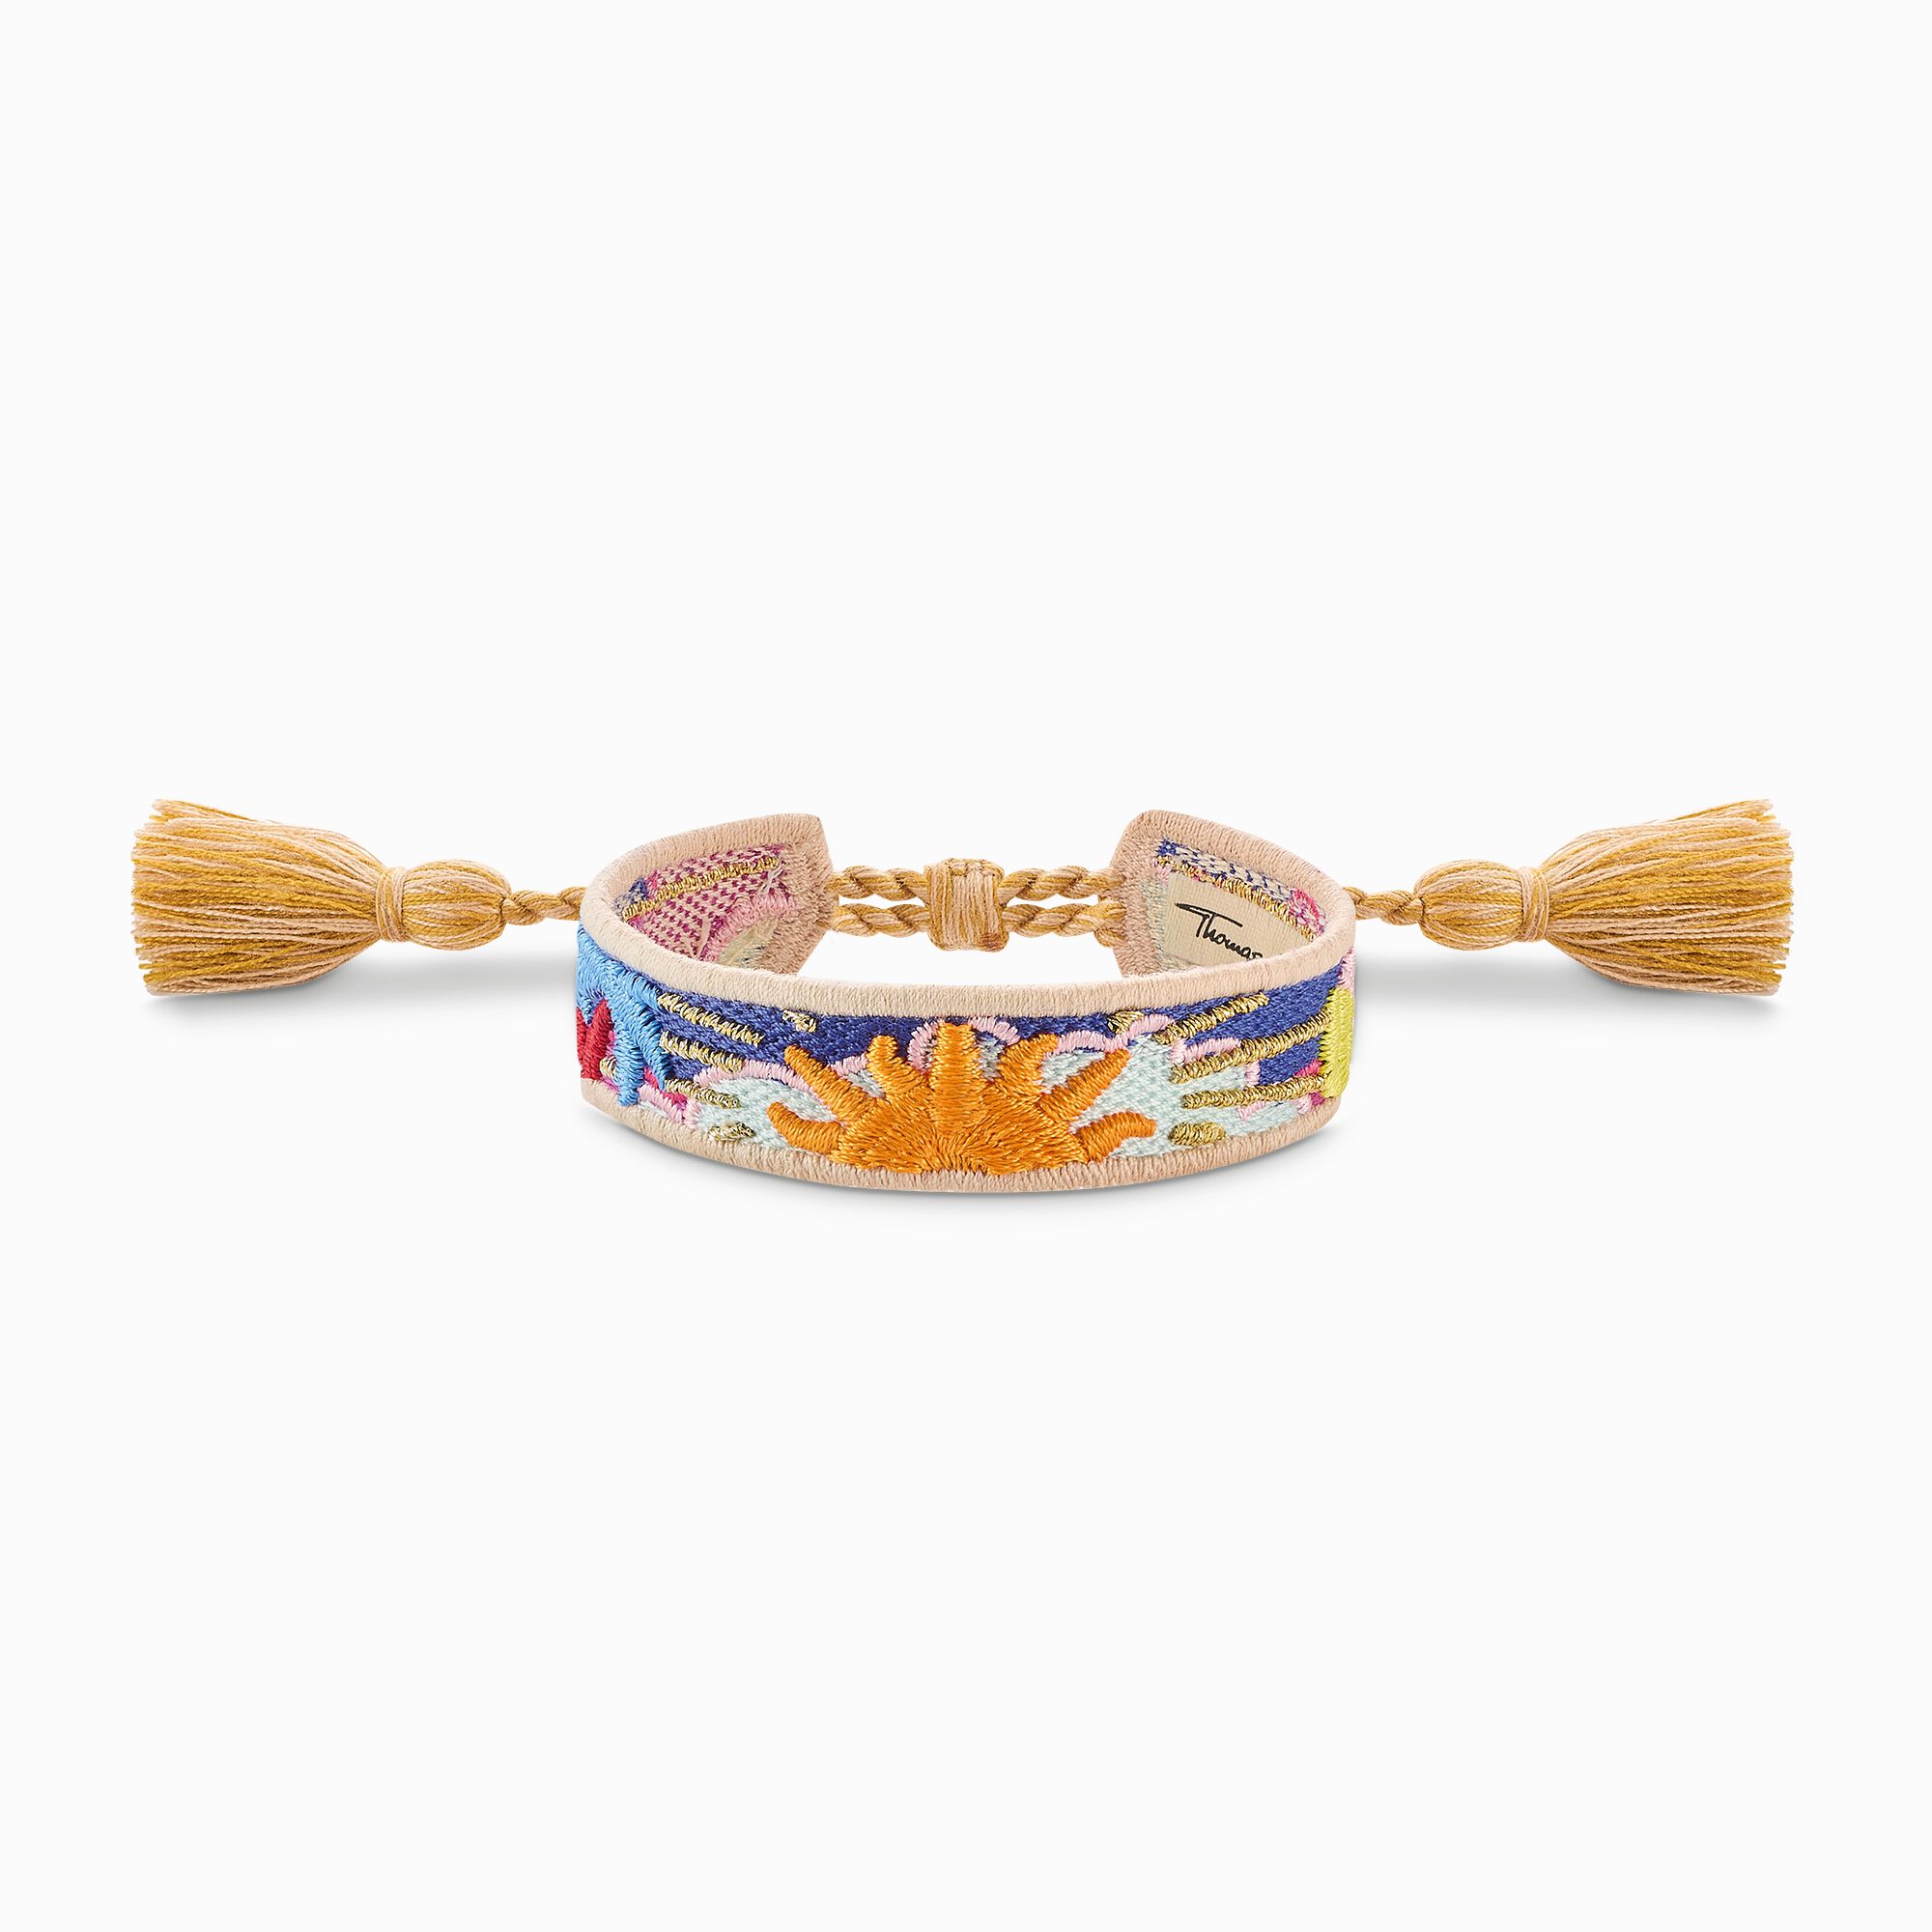 Woven bracelet with ornaments in orange, dark blue, green &amp; red from the Charming Collection collection in the THOMAS SABO online store